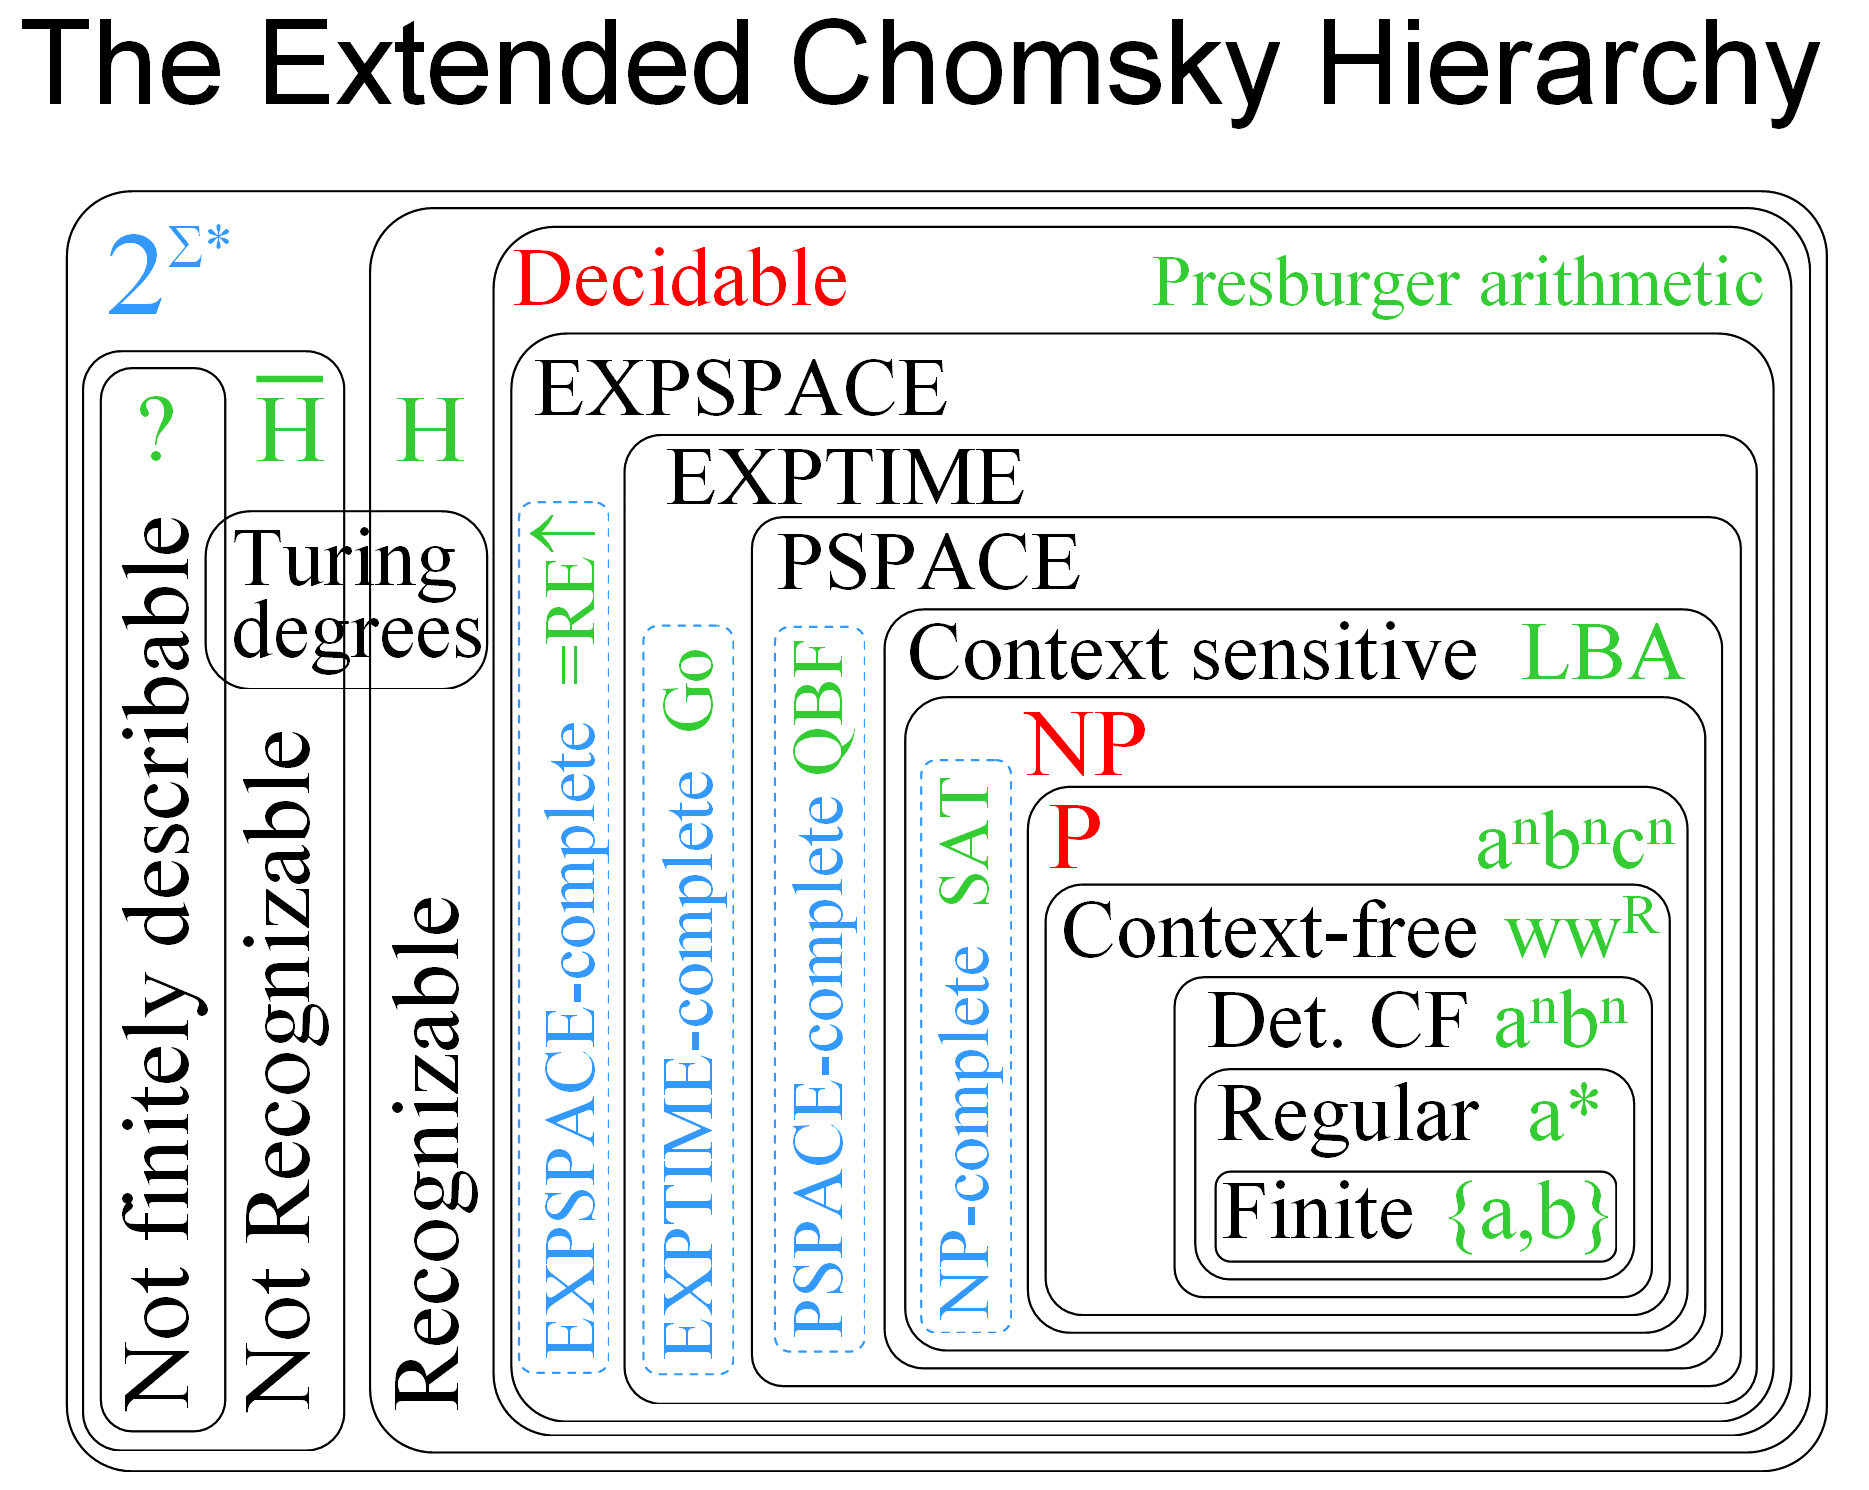 Gabe Robins's Extended Chomsky Hierarchy Diagram